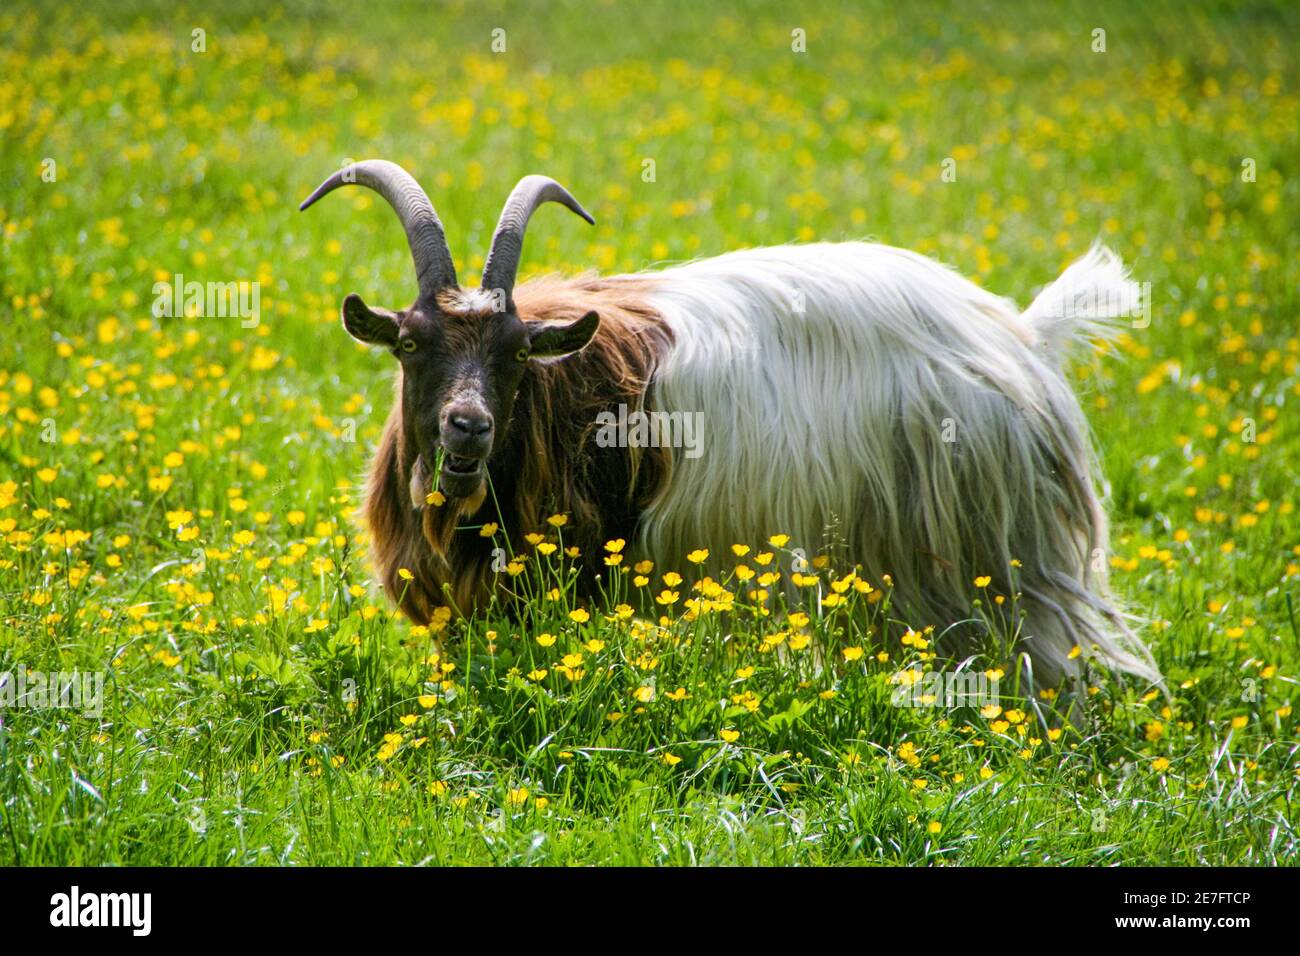 A goat with impressive horns stands in a meadow with yellow flowers. Stock Photo